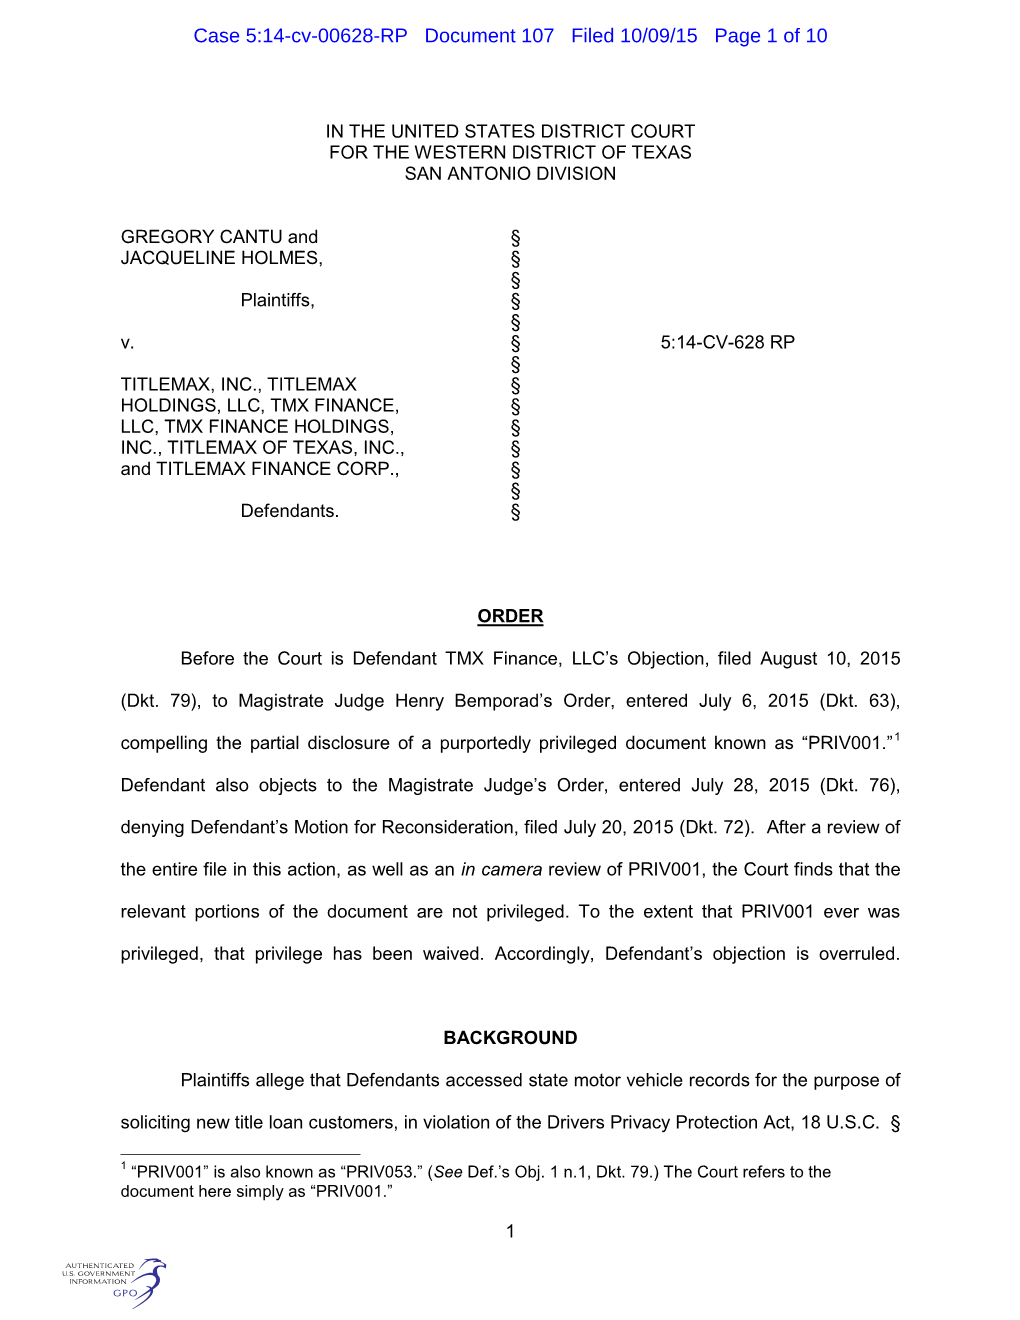 Case 5:14-Cv-00628-RP Document 107 Filed 10/09/15 Page 1 of 10